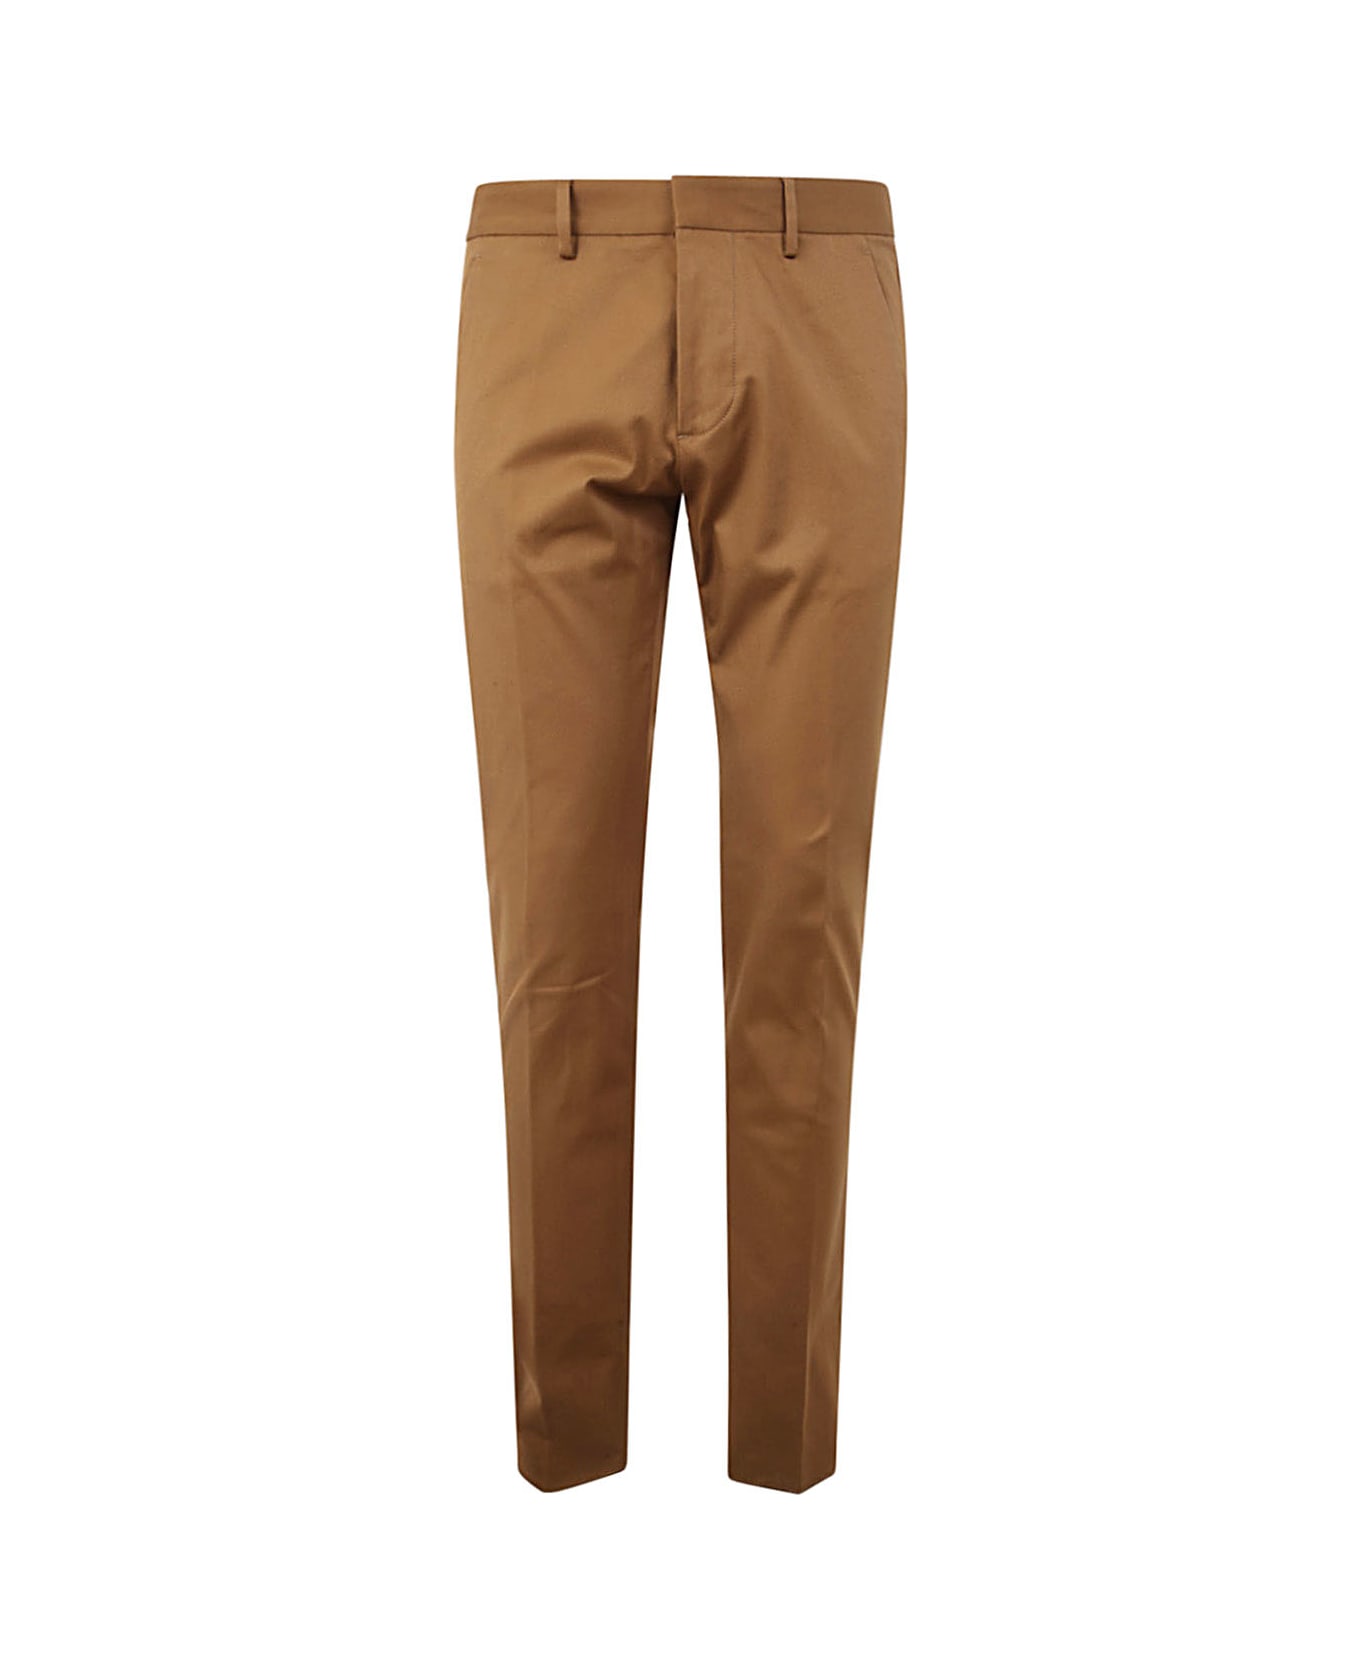 Dsquared2 Cool Guy Pant - Camel